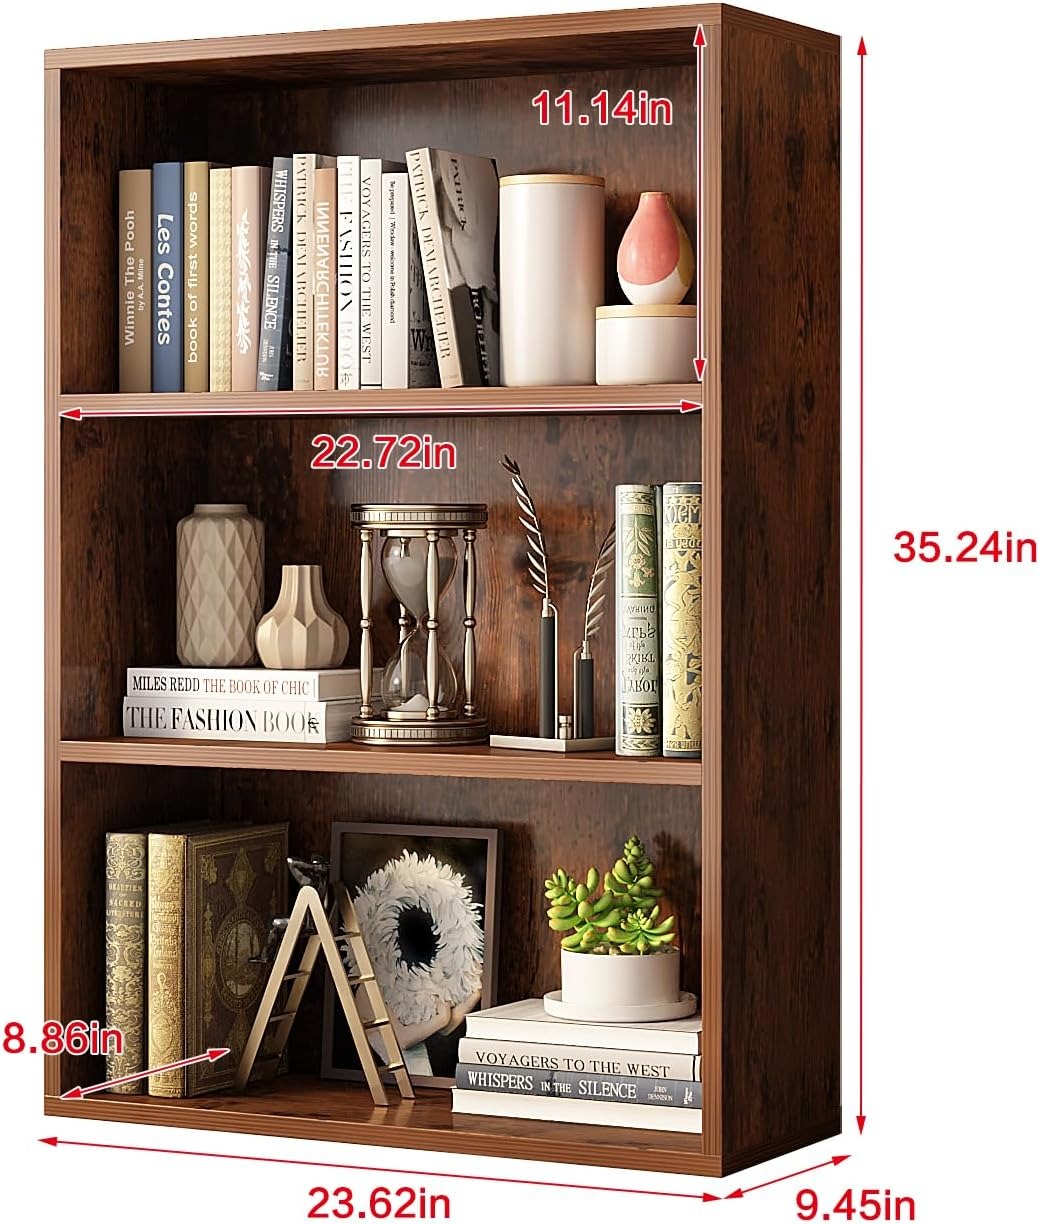 3-Tier Cube Display Shelves size introduction